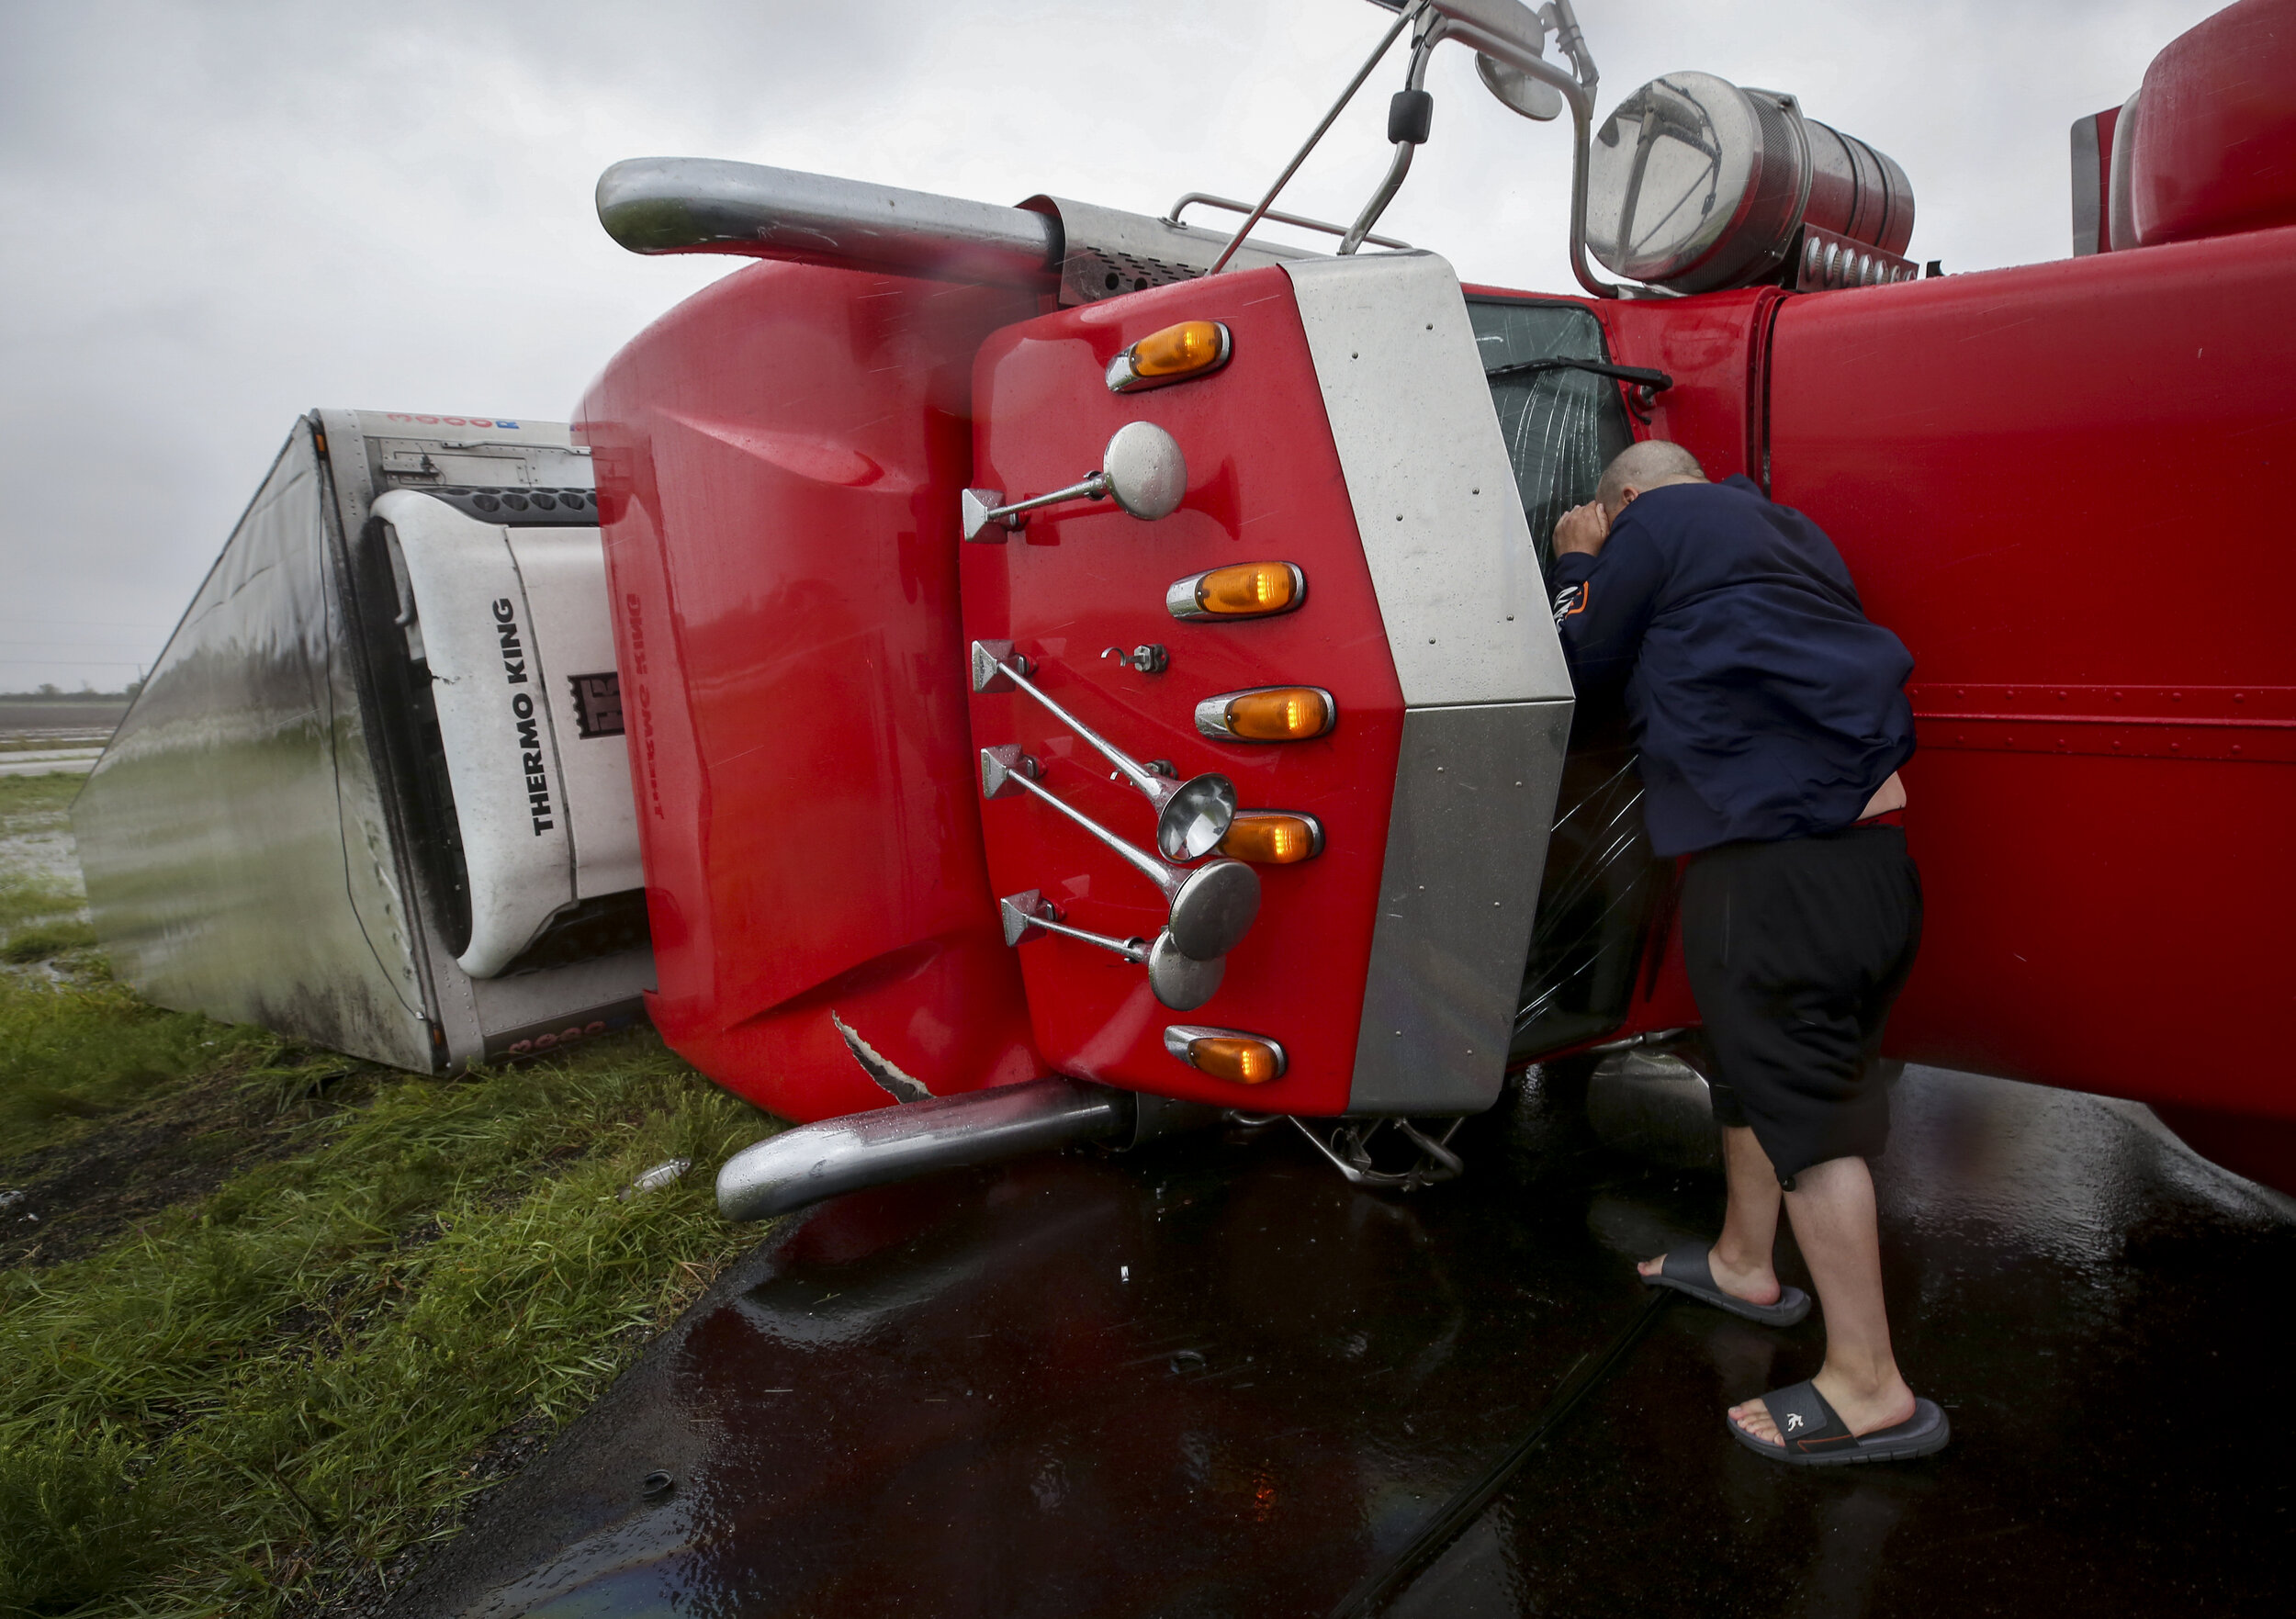  Dave McGrew looks into the cabin of an 18-wheeler that was flipped on its side on Highway 59 West as Hurricane Harvey made landfall in the Central Gulf Coast on Saturday, Aug. 26, 2017, in Texas. Mcgrew stopped while on his way to check on his famil